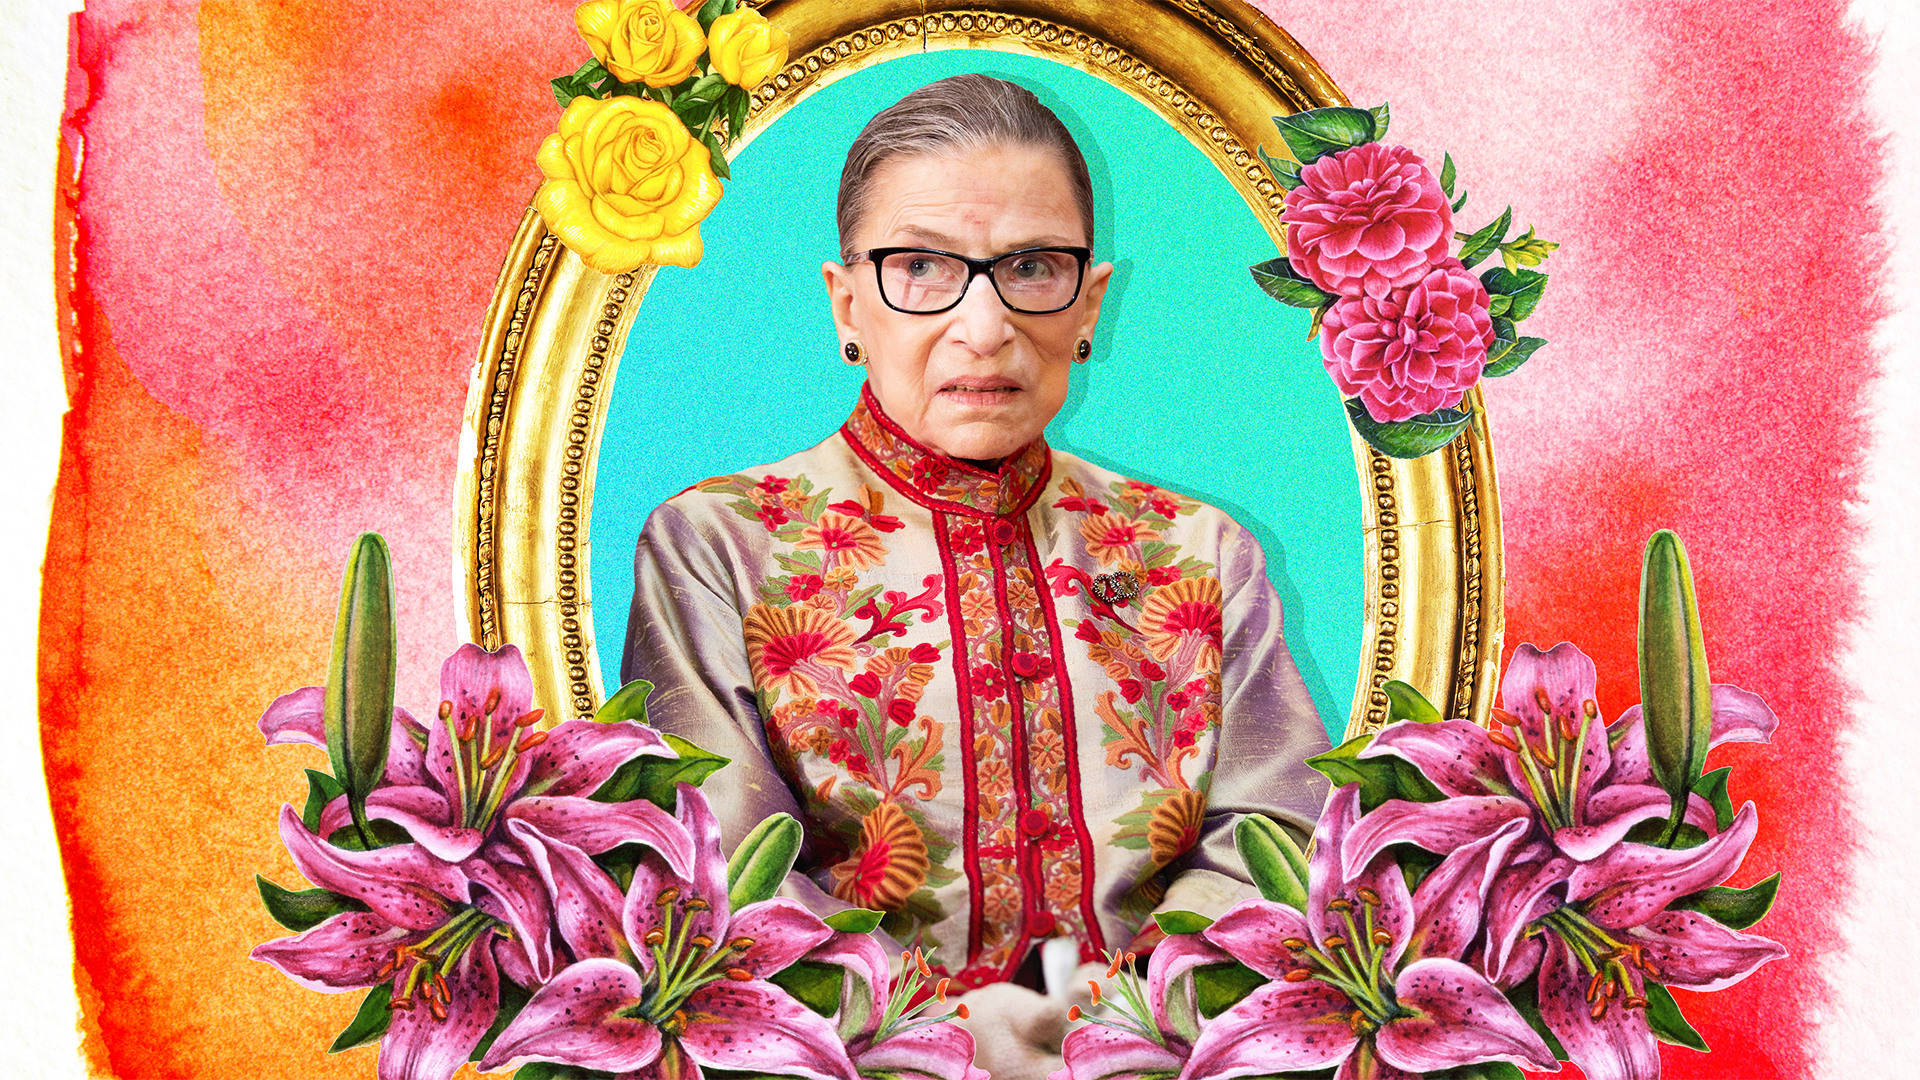 Ruth Bader Ginsburg Surrounded By Flowers Wallpaper